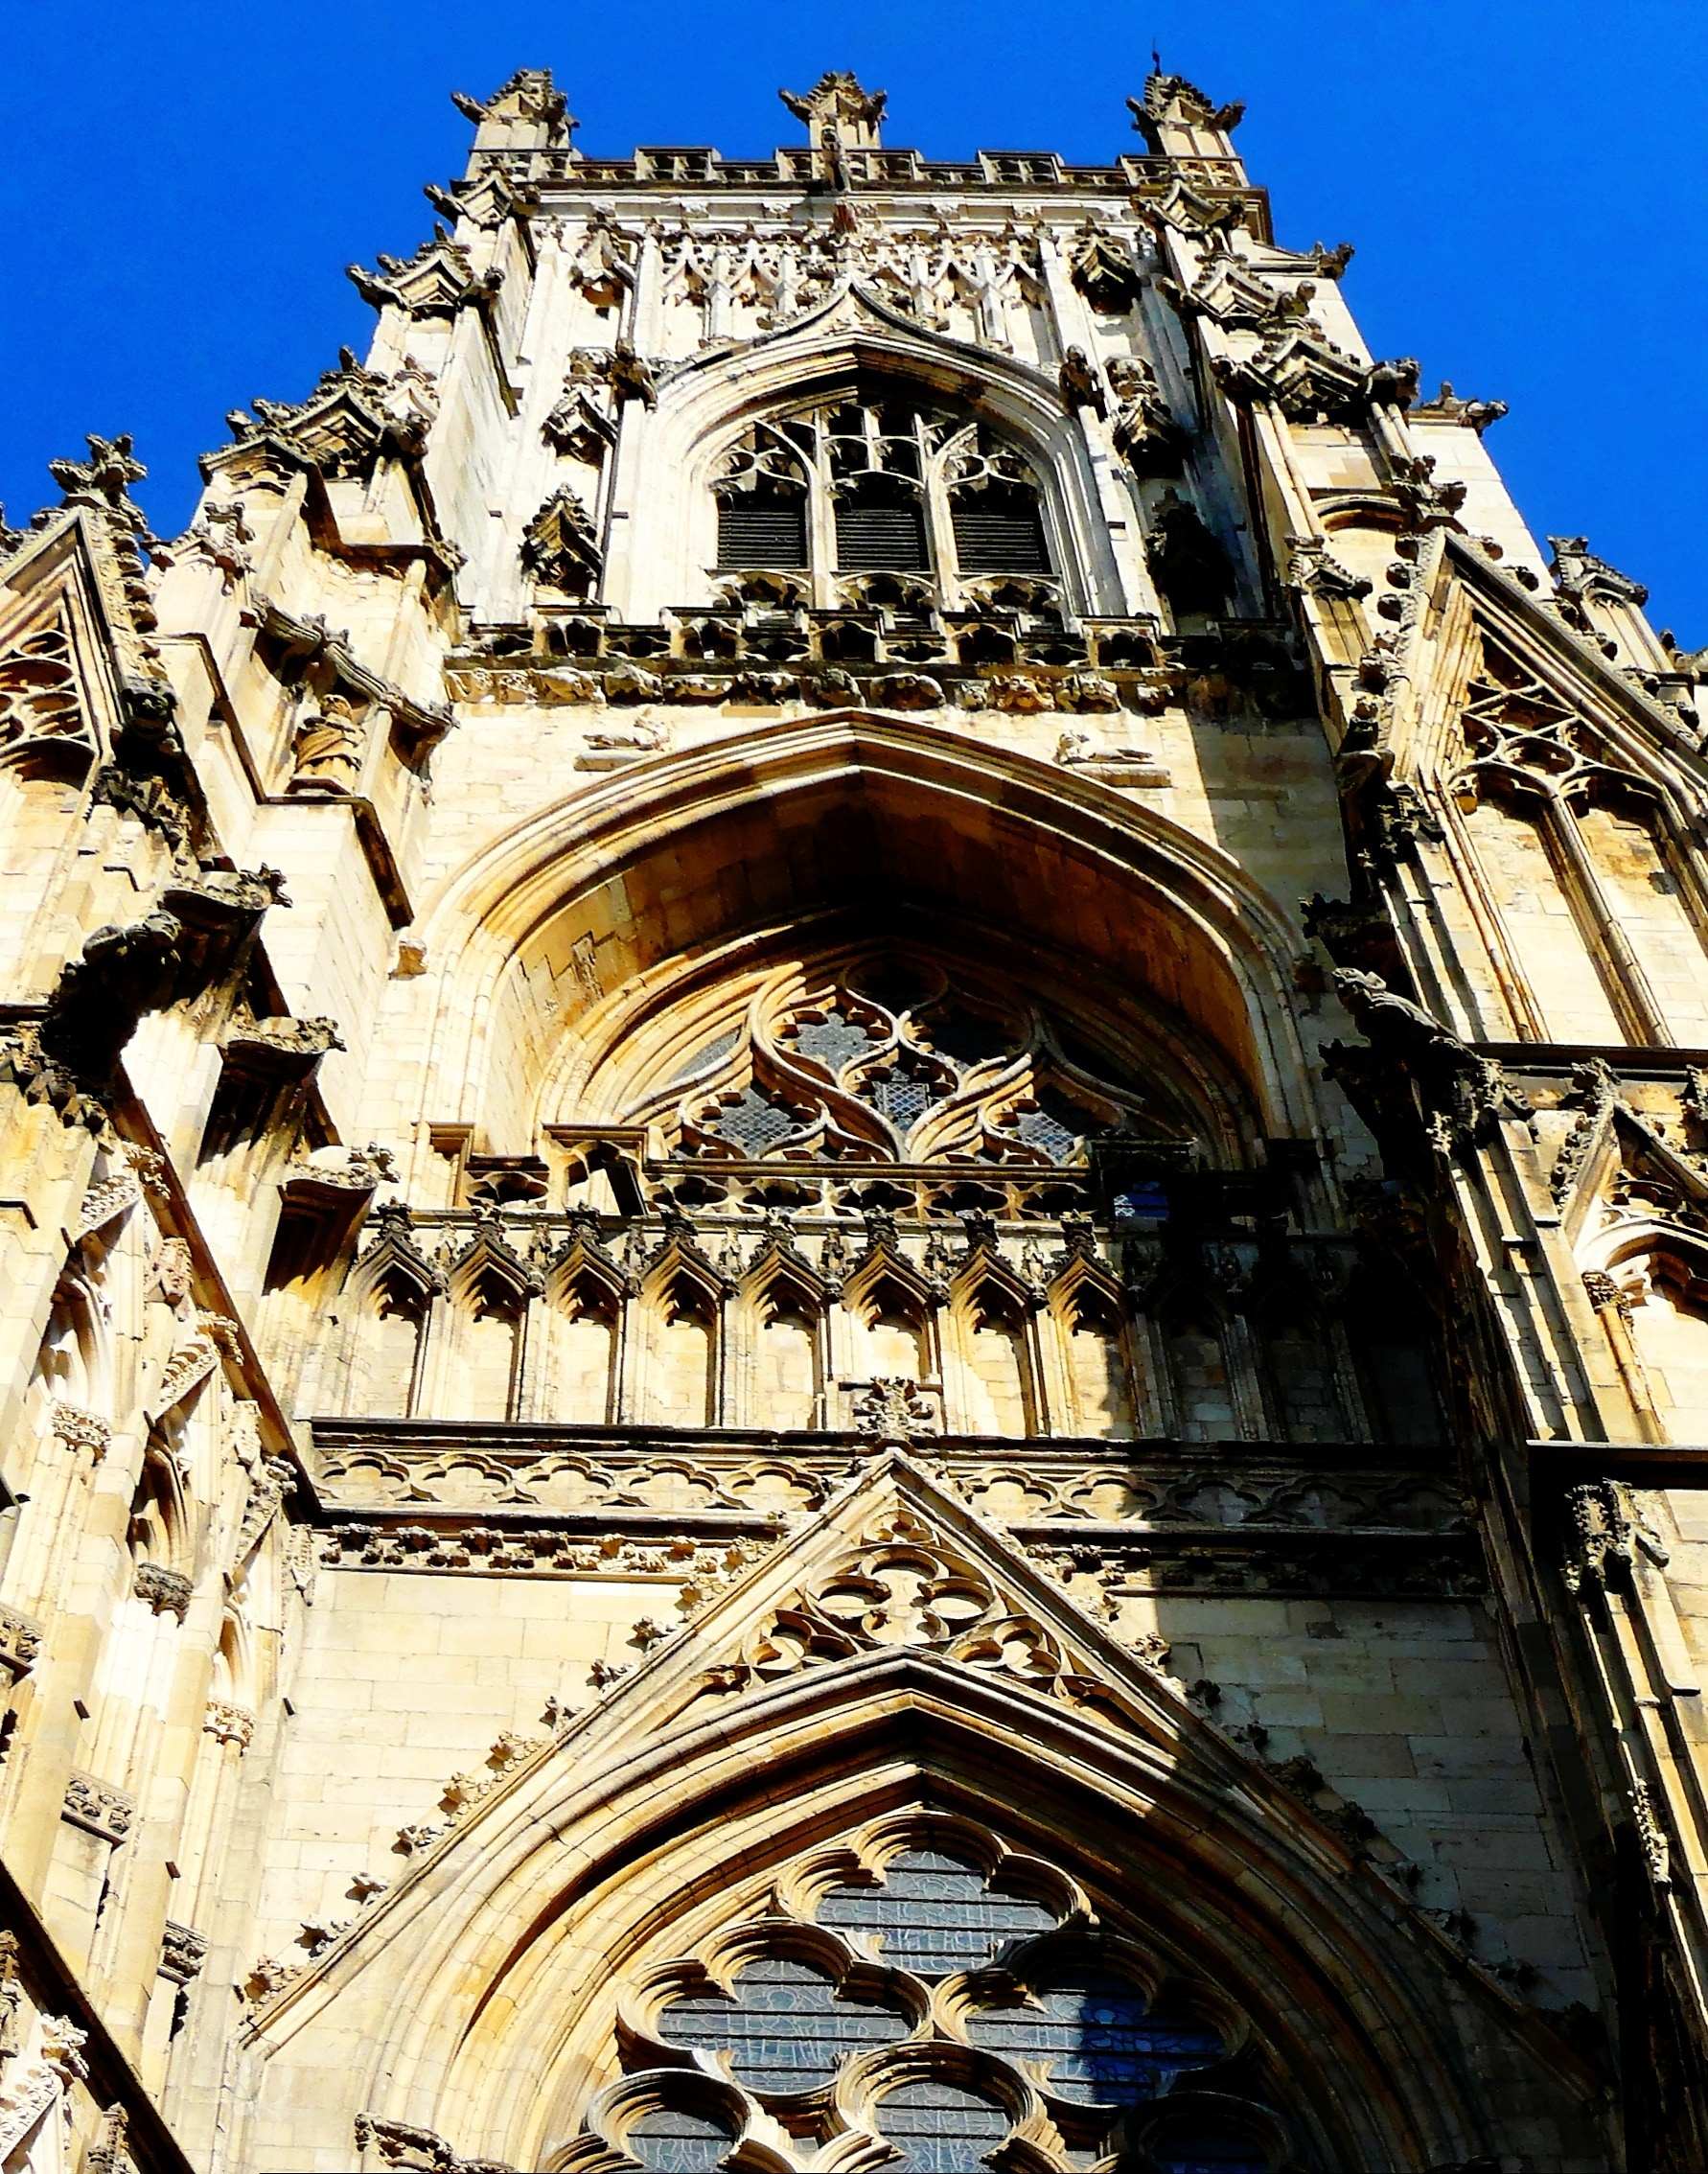 worm's eye view photography of cathedral under clear blue sky during daytime